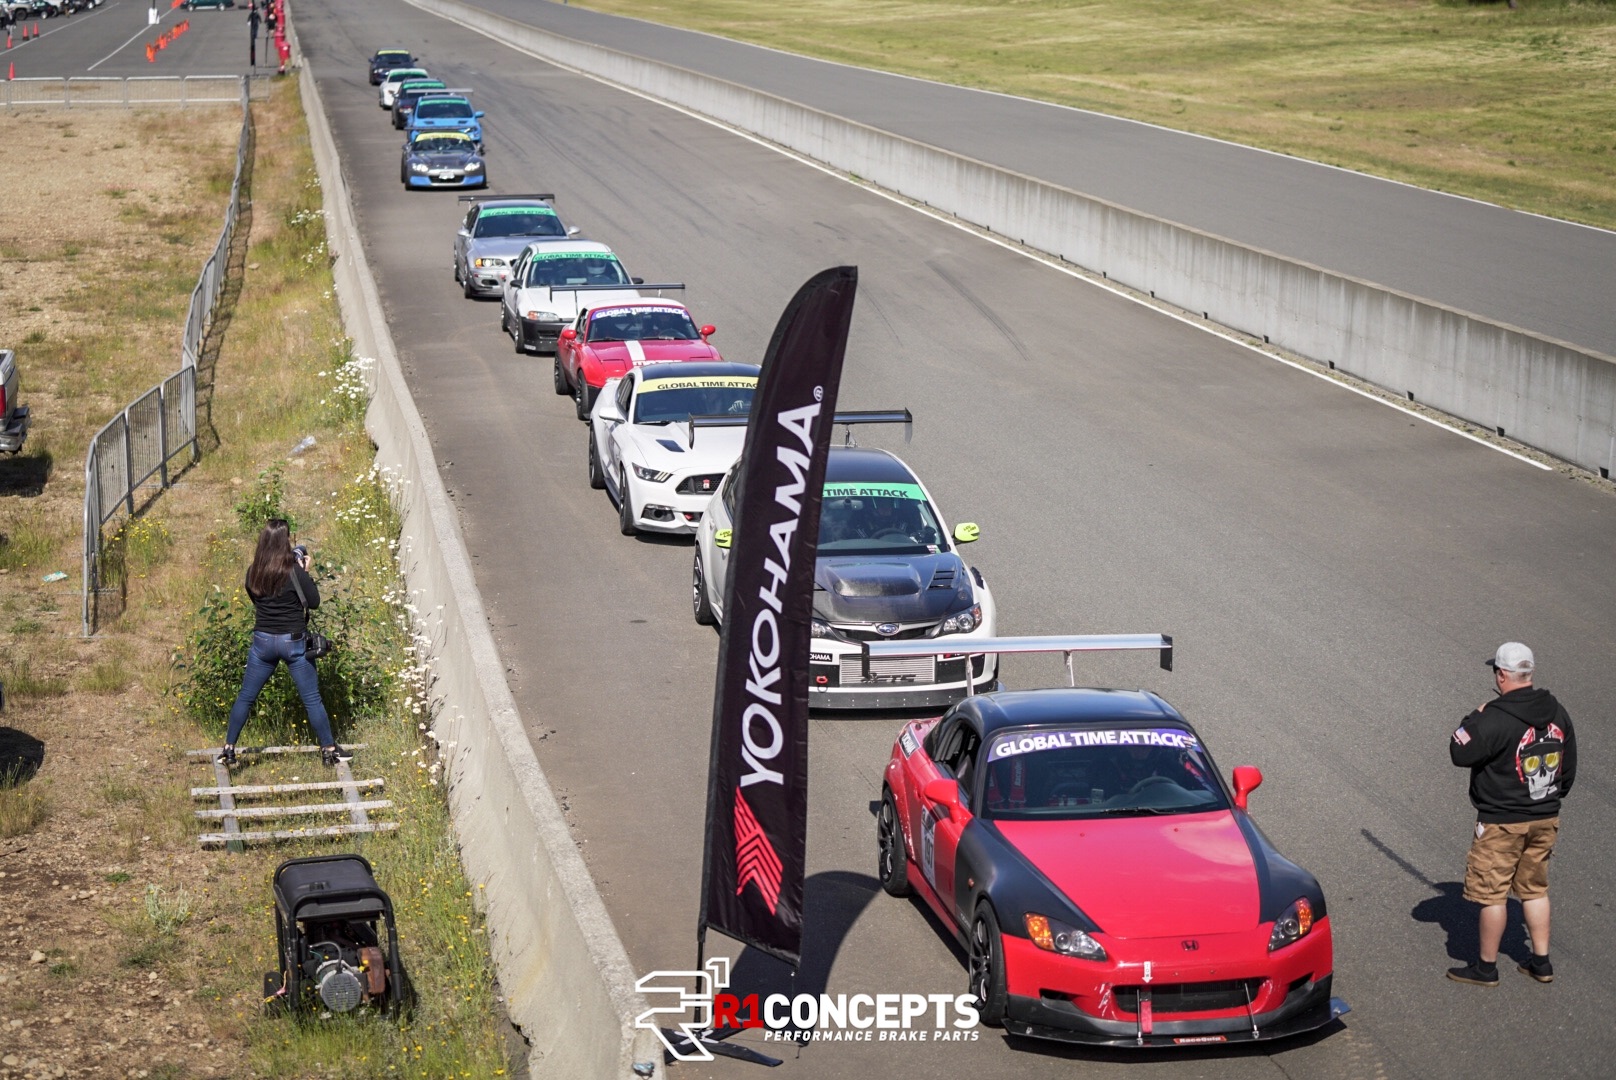 R1 Concepts at the Global Time Attack at Ridge Motorsports Park